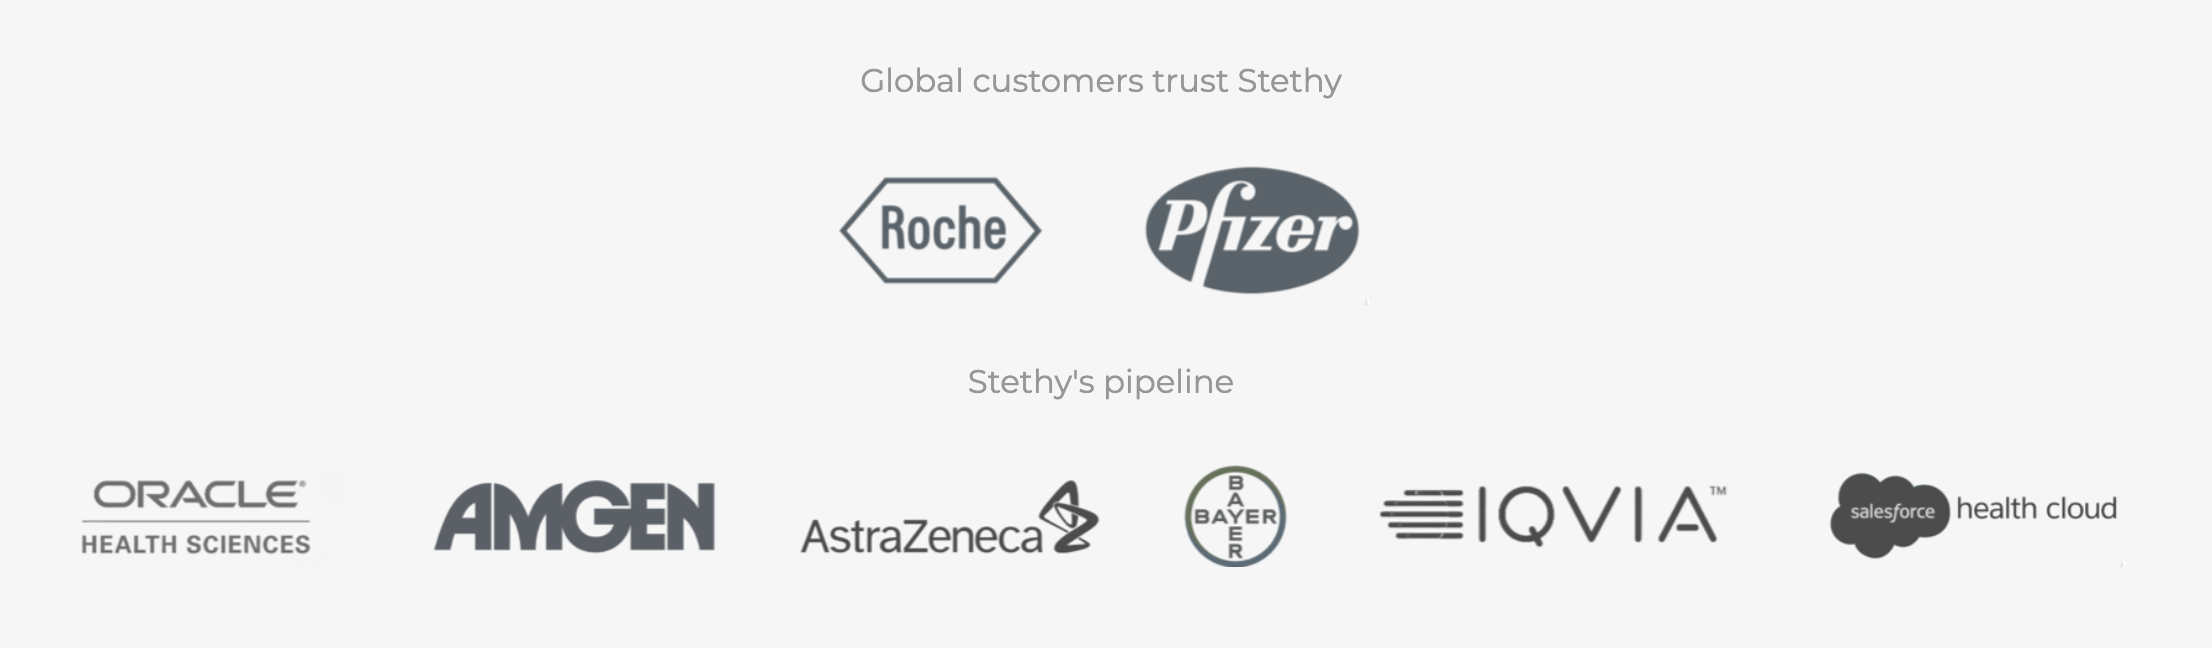 Stethy product / service